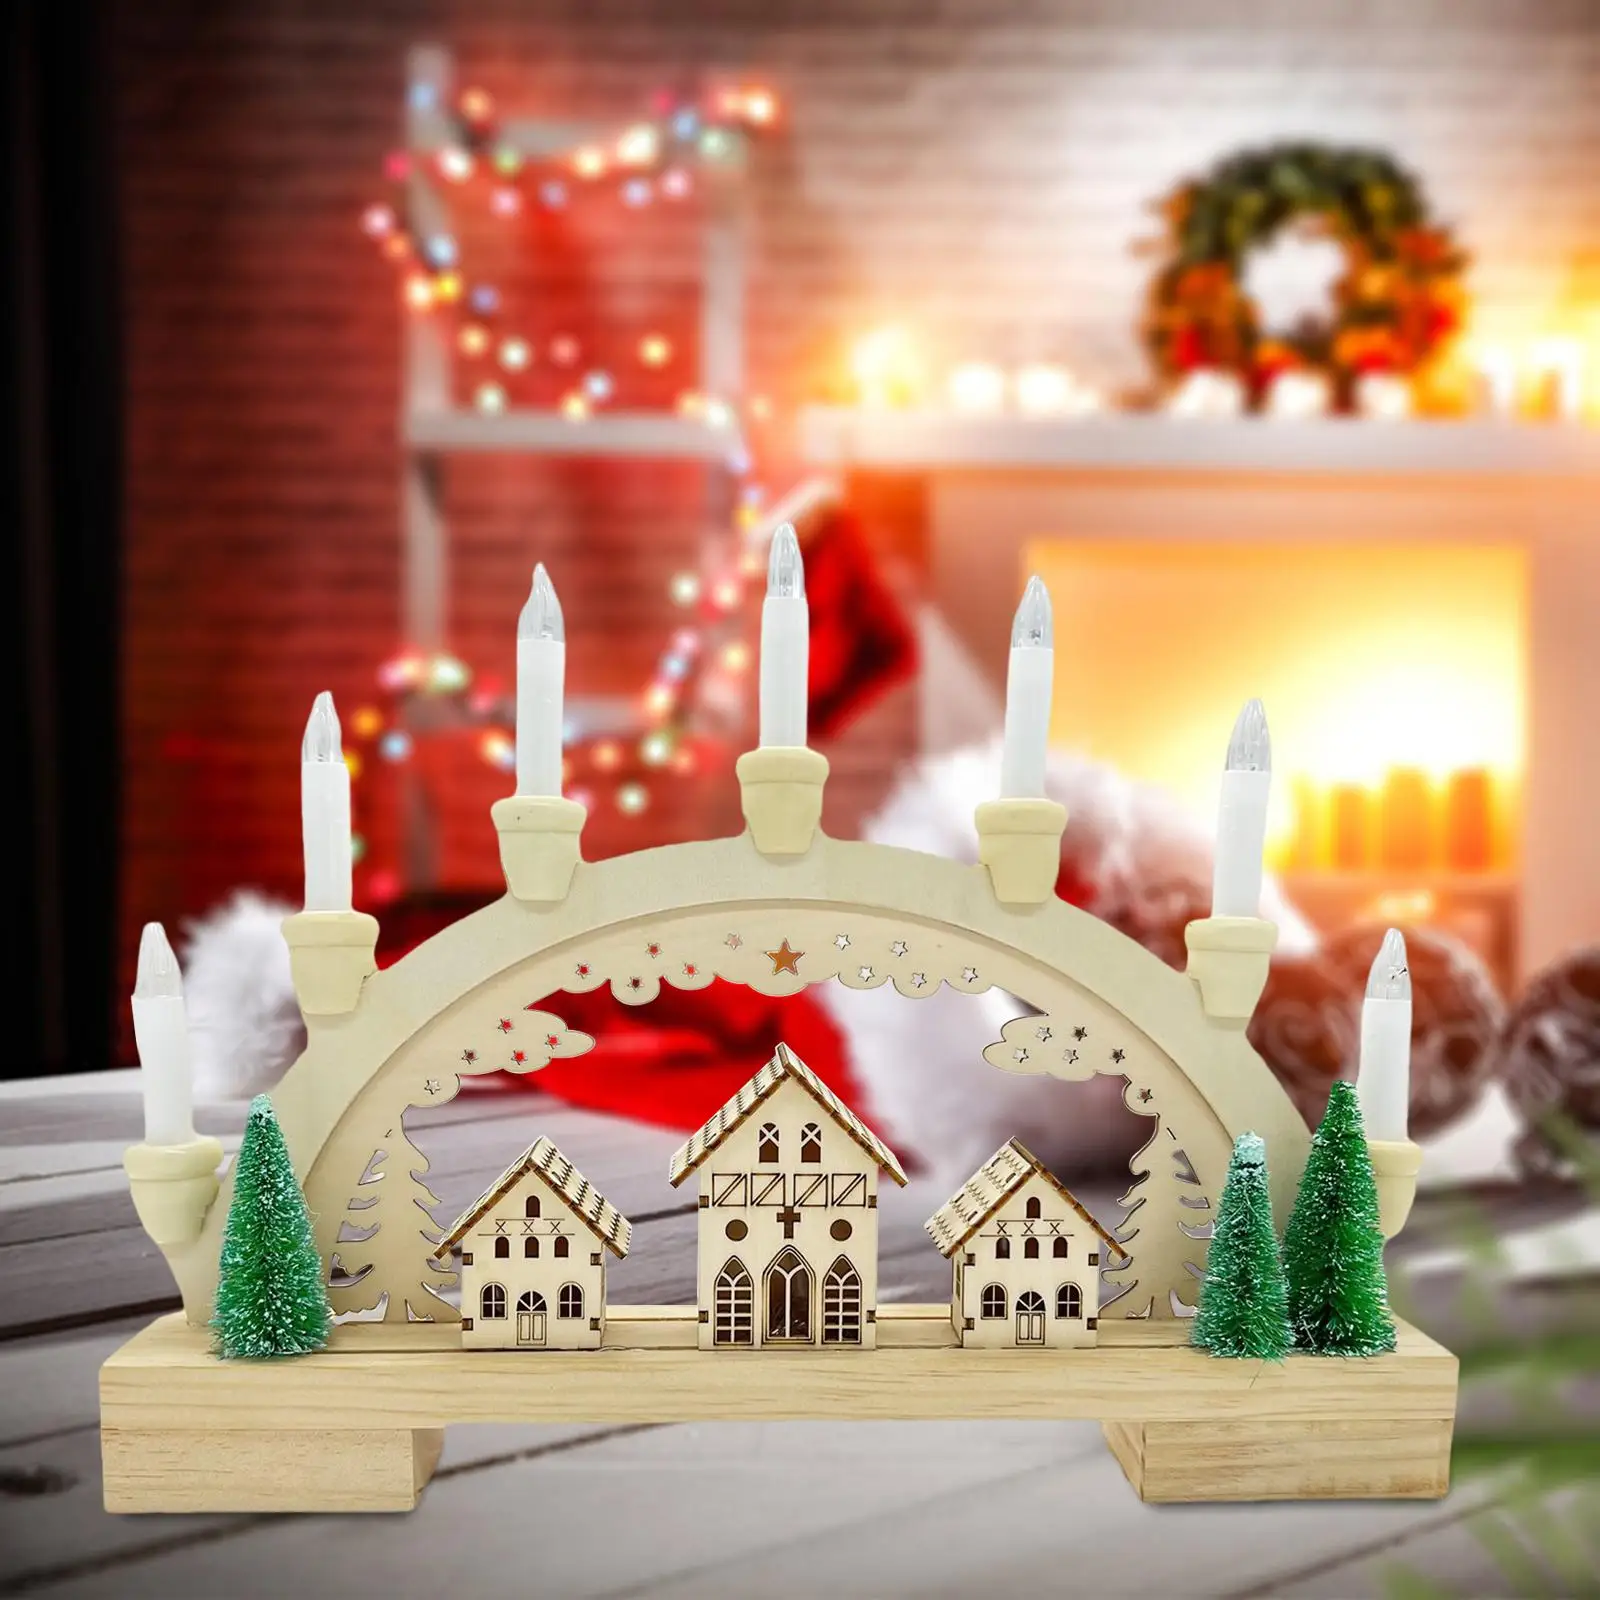 Holiday Atmosphere Light Ornament with Lights Village Houses Town Creative Holiday Ornament for Bedroom Decorative Ornaments